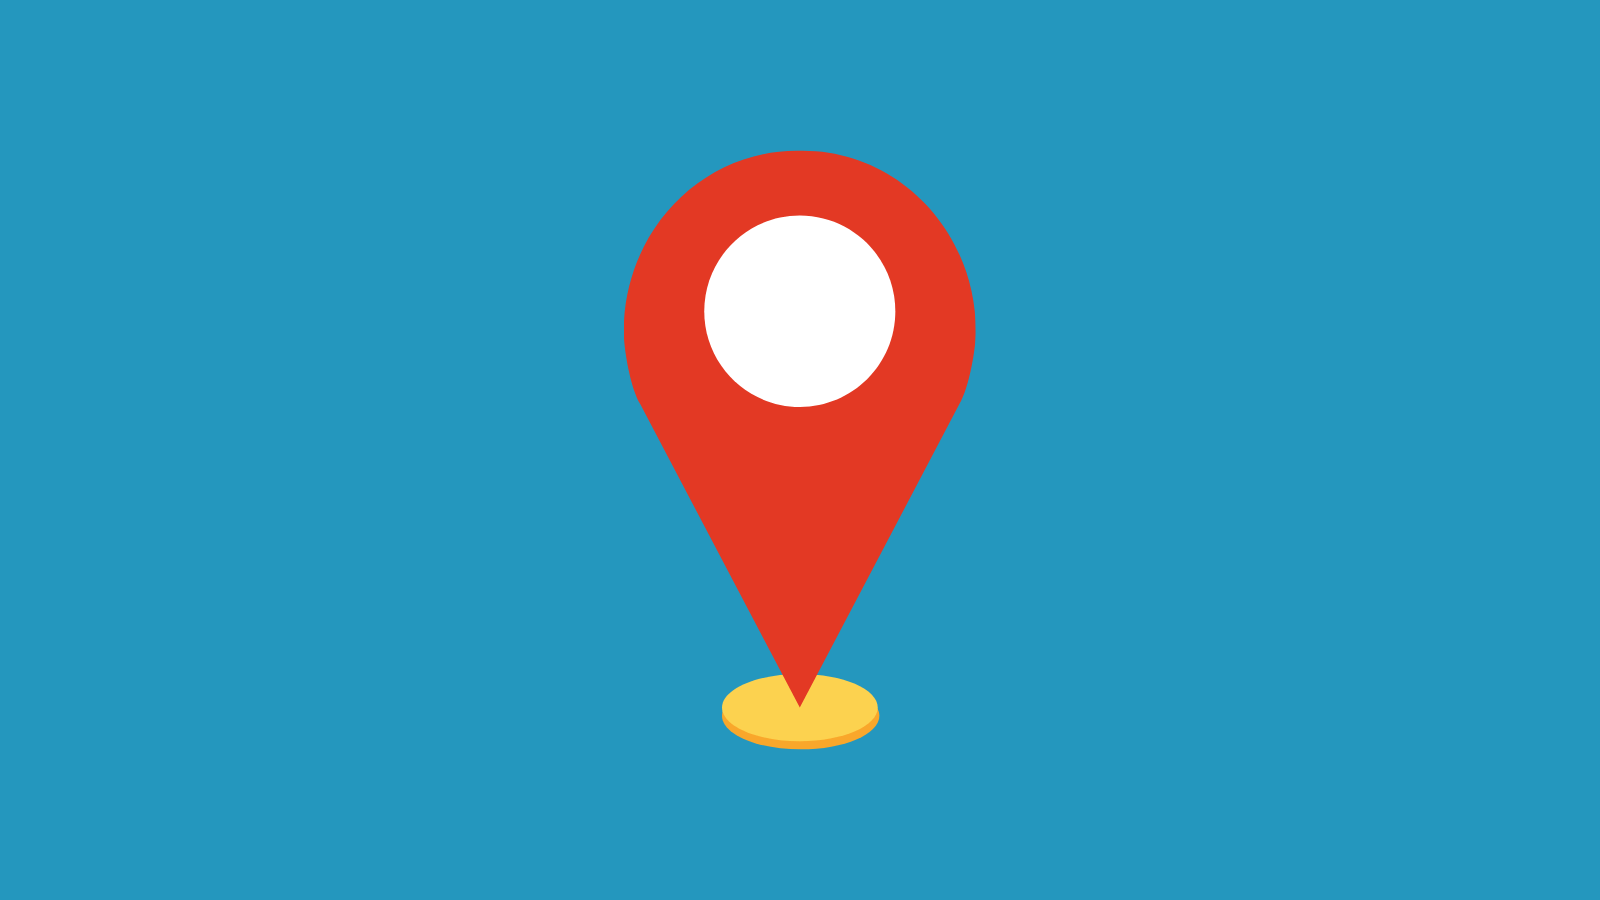 A pin on a digital map icon